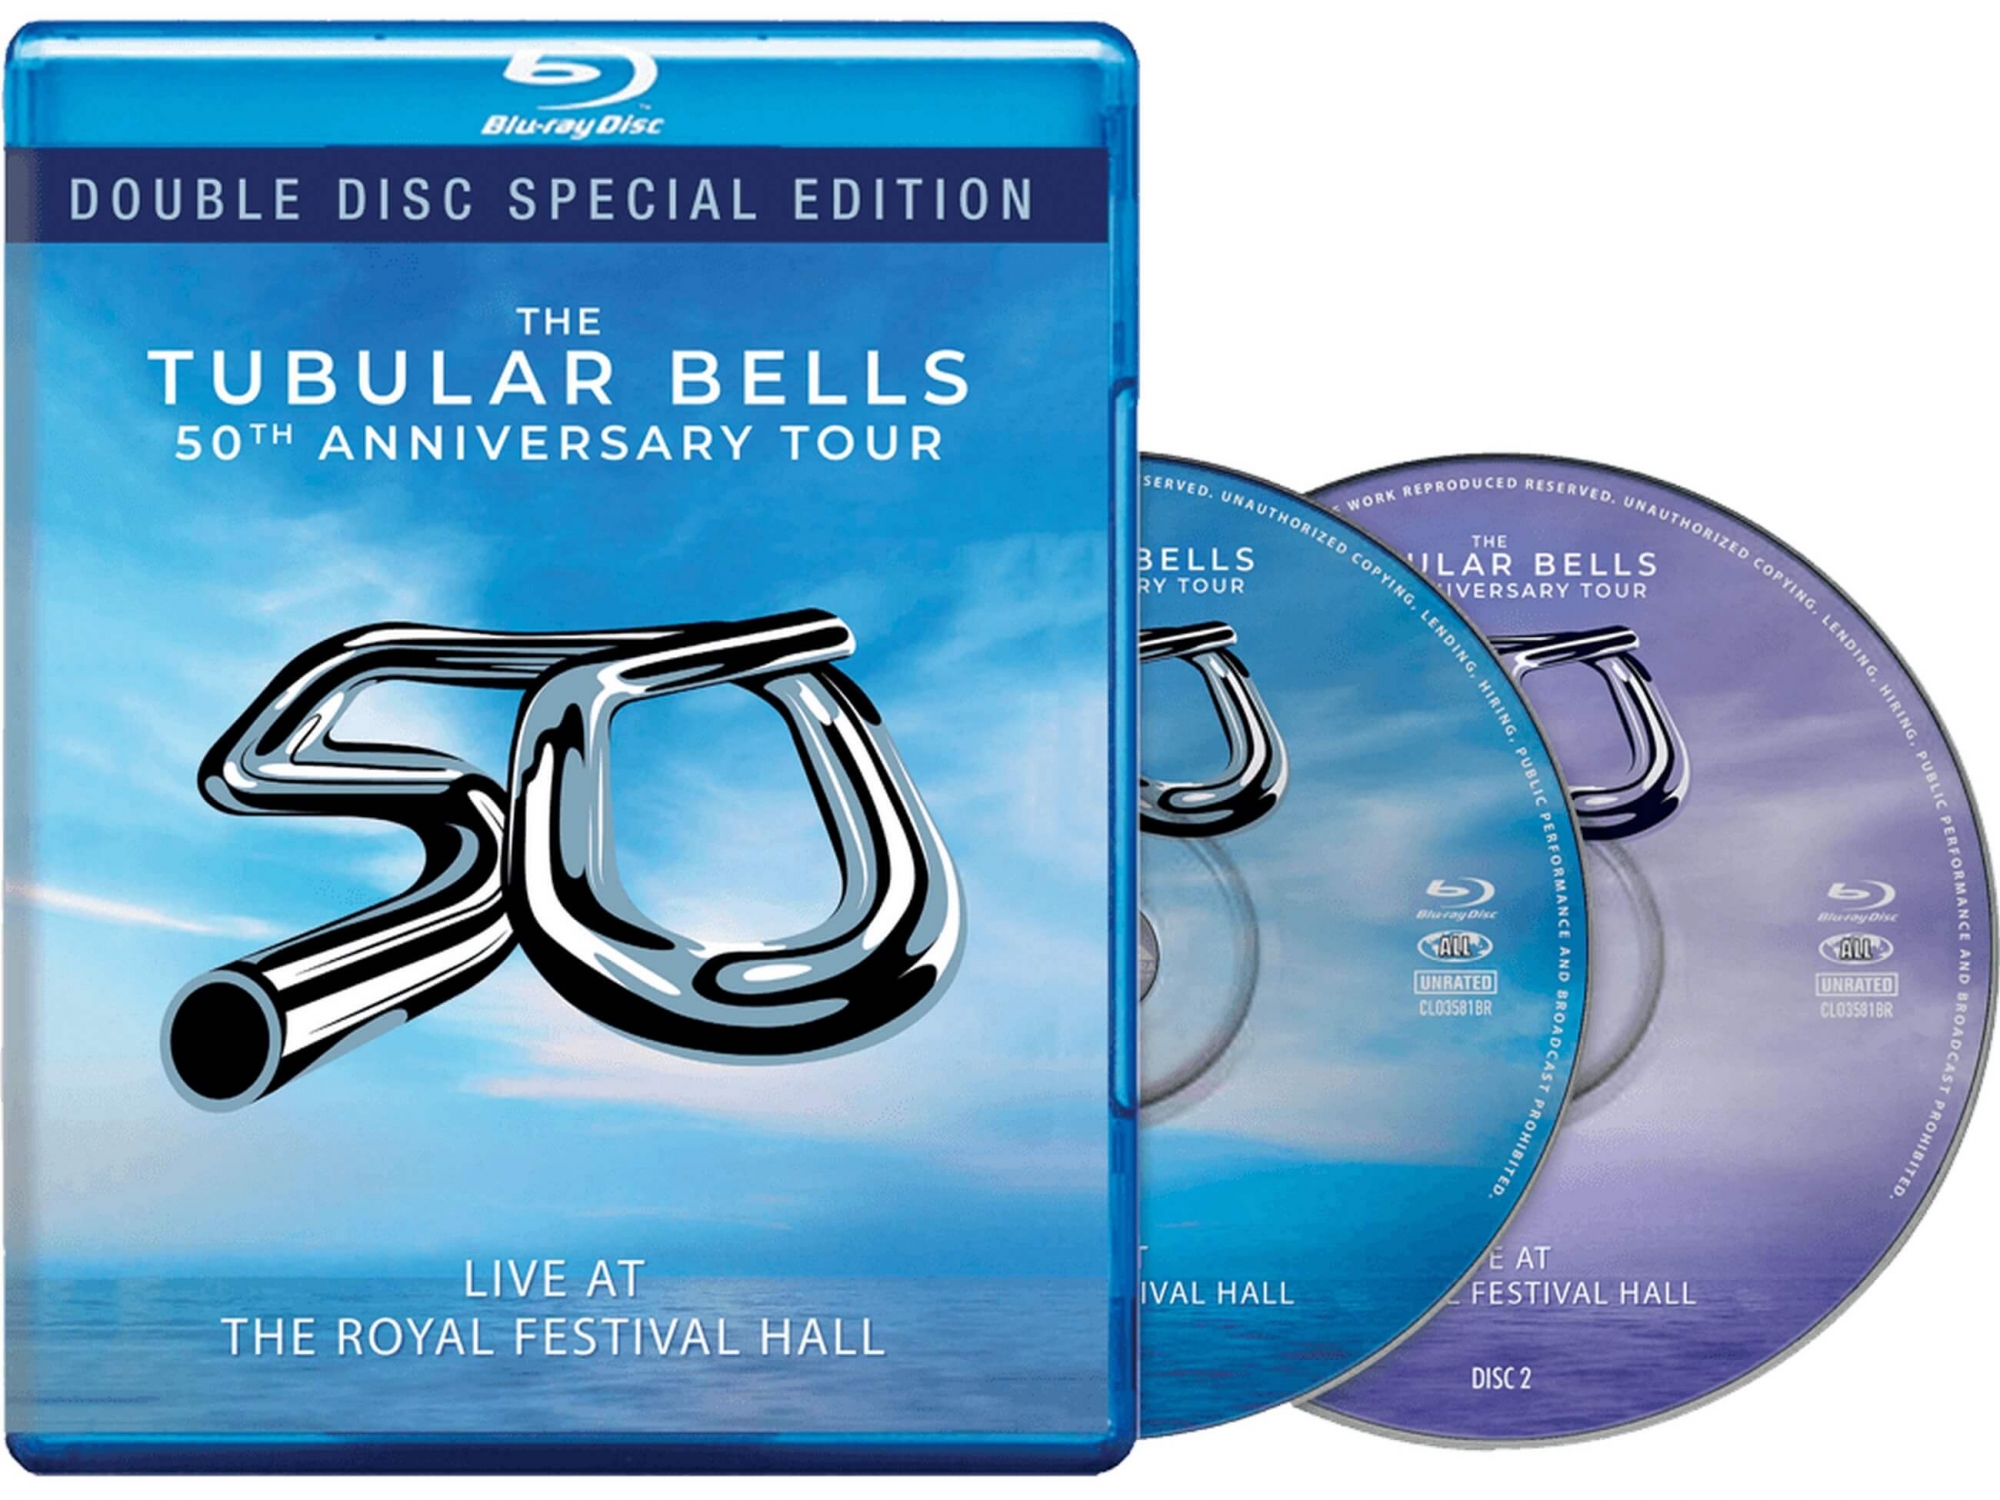 Mike Oldfield Tubular Bells 50th Anniversary Tour Blu-ray